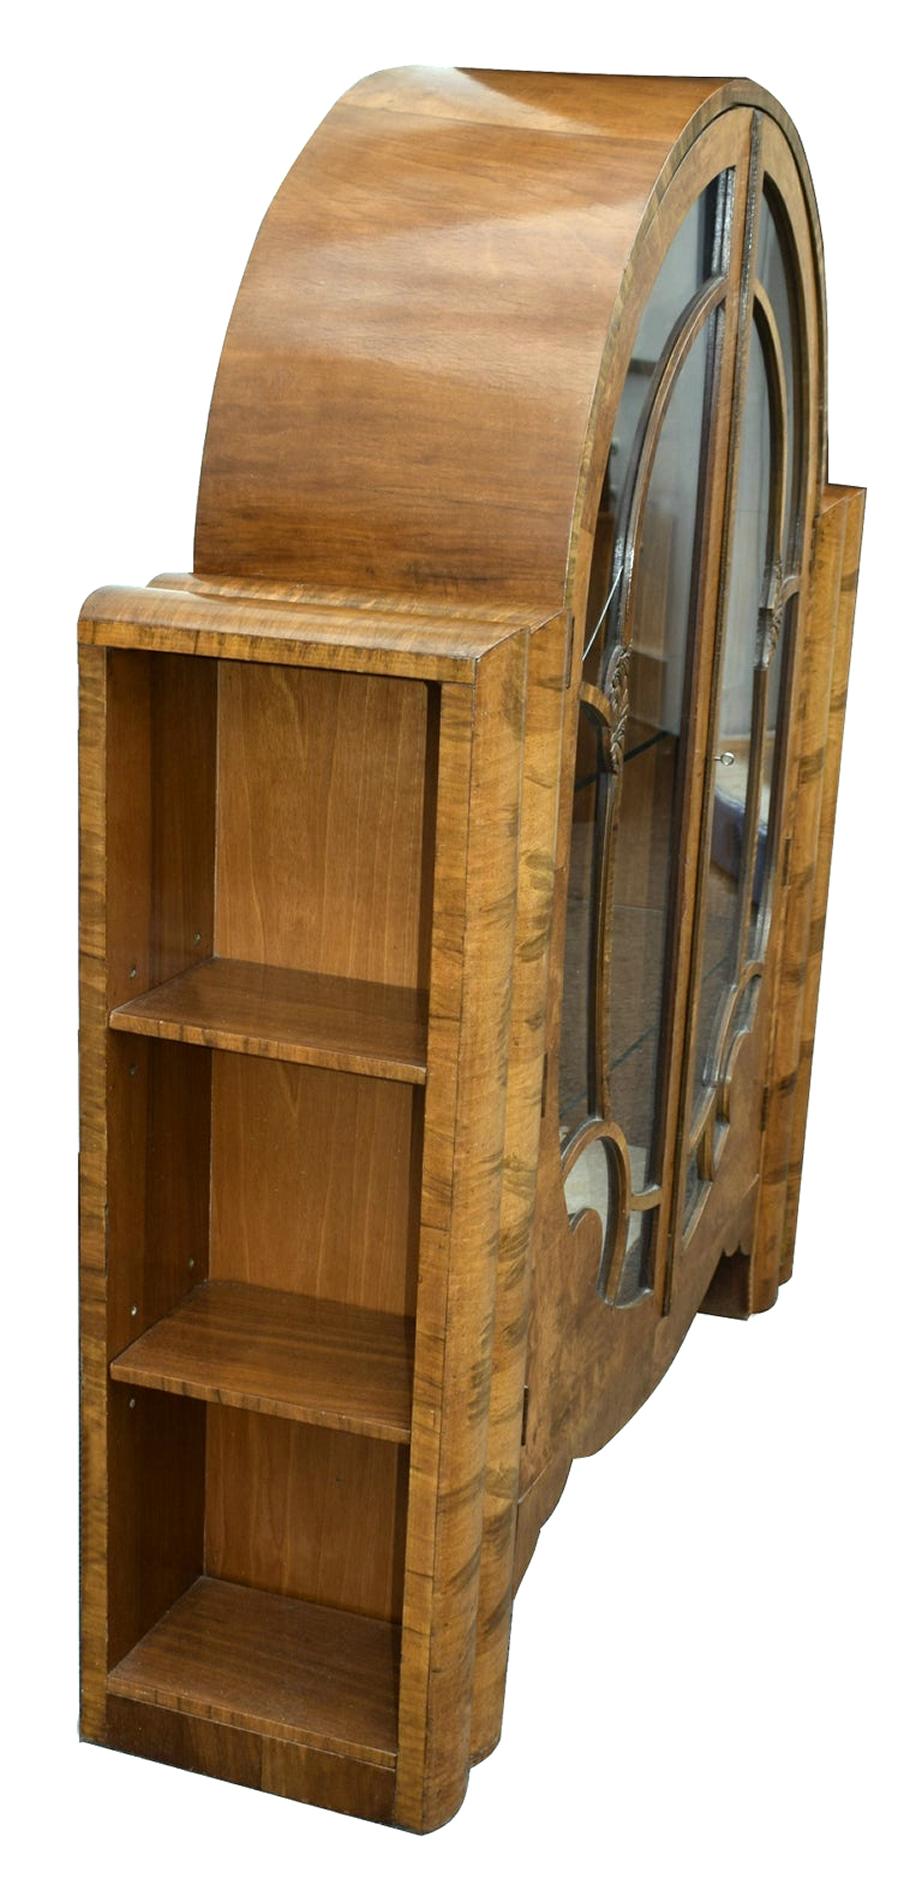 Superb 1930s Art Deco walnut display cabinet. Gorgeous mid-tone walnut, still with original working key and three glass shelves and usable bottom shelf. Generously spaced interior with lined backing. To the sides are bookshelves which can be